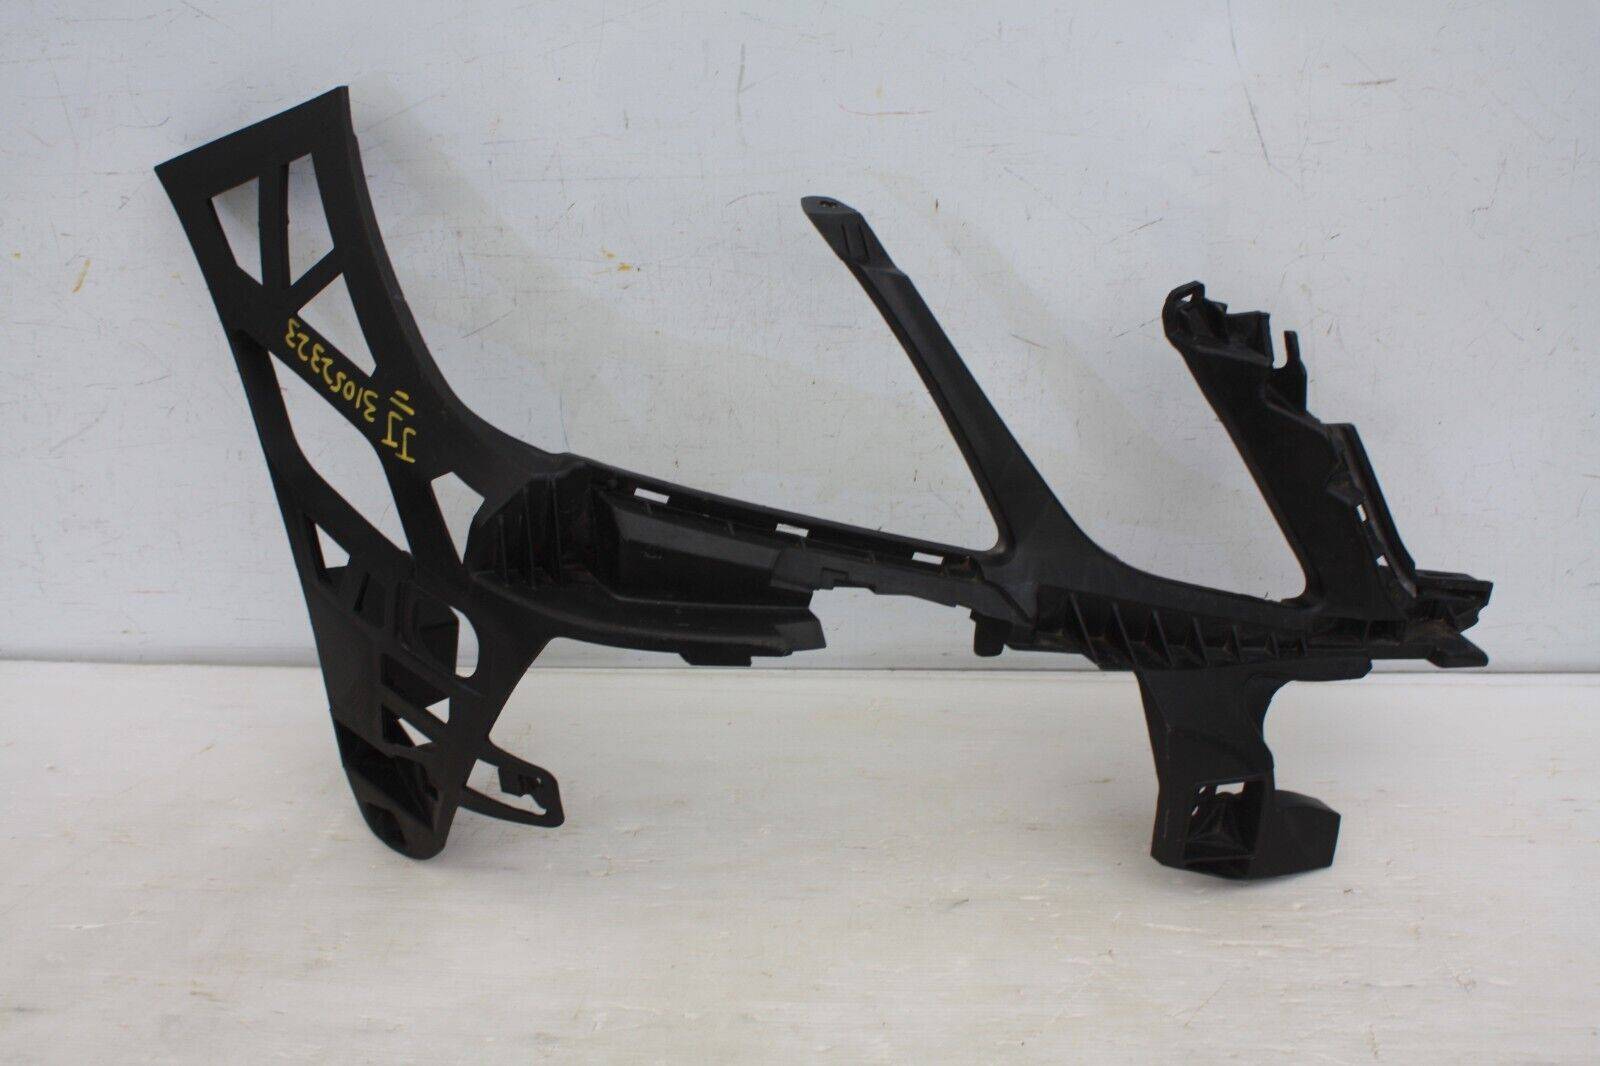 Mercedes E Class W212 AMG Front Bumper Right Bracket 2009 TO 2013 A2128852265 175837156611